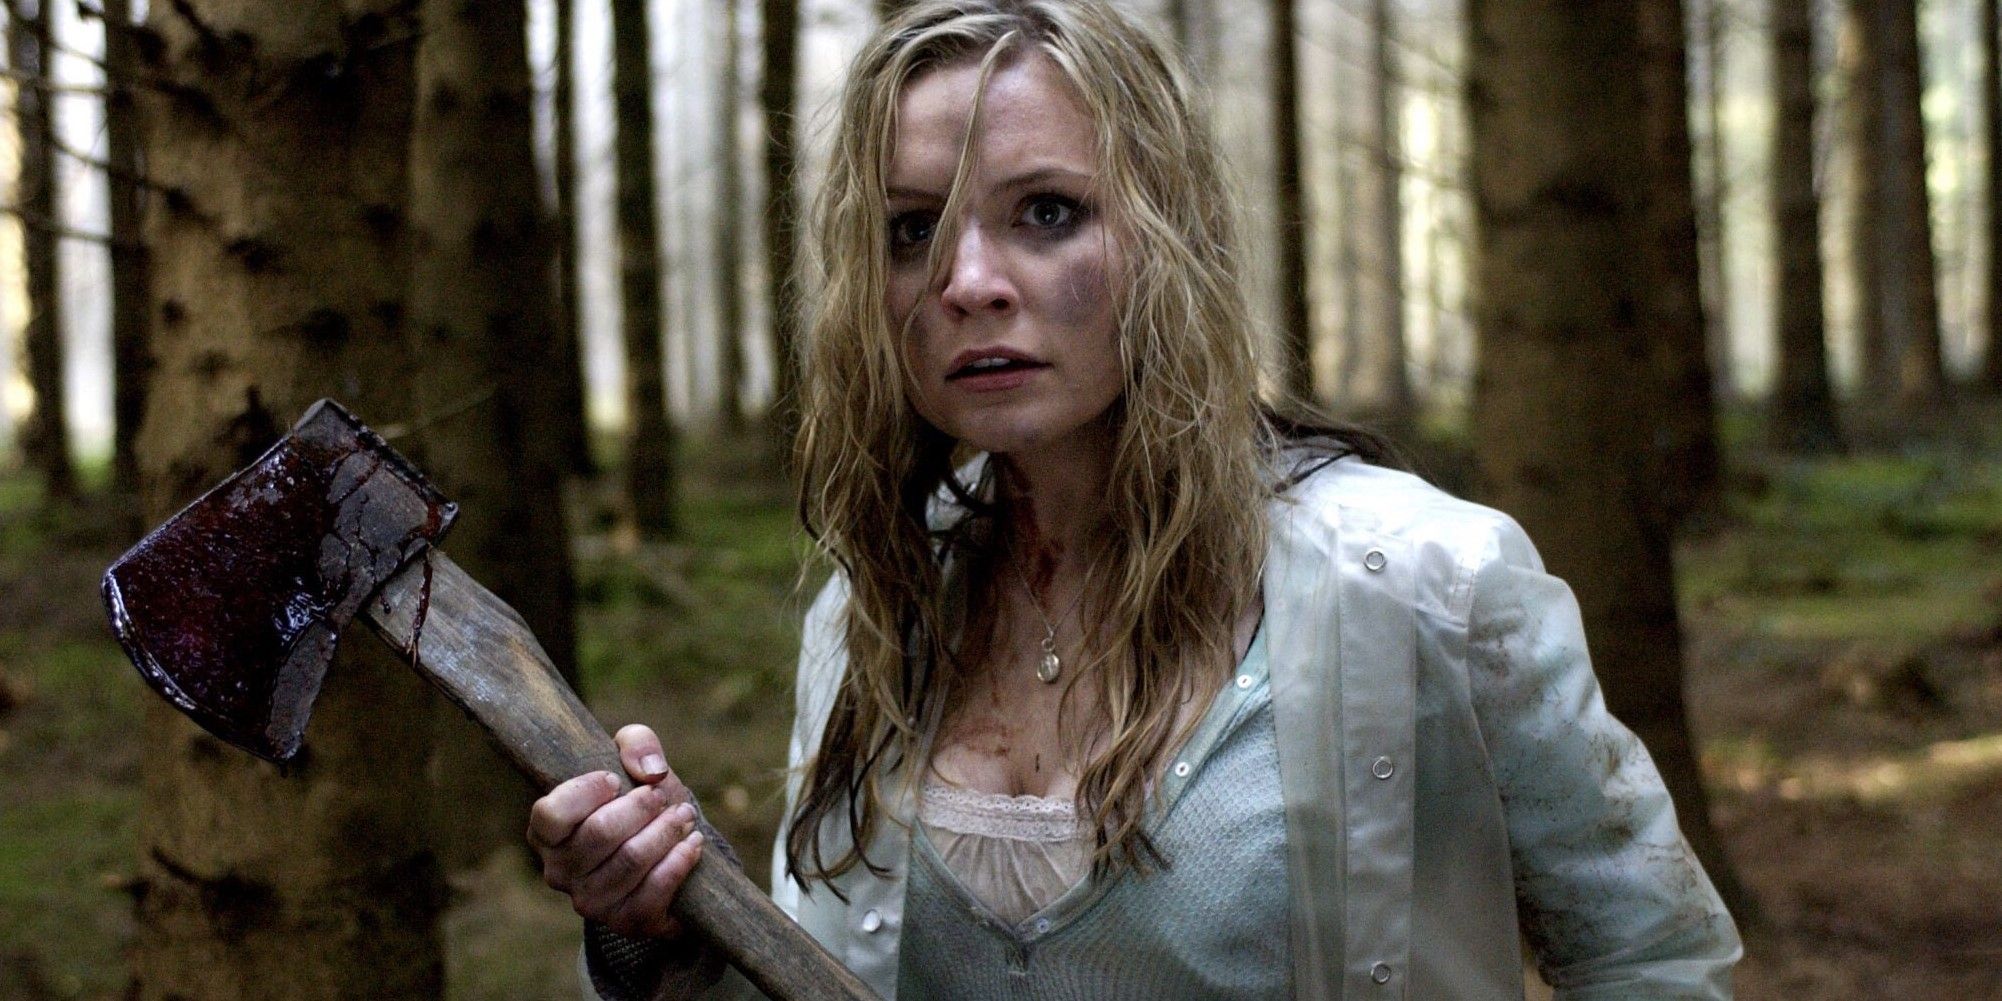 Tara wielding an axe in the forest in Shrooms movie.